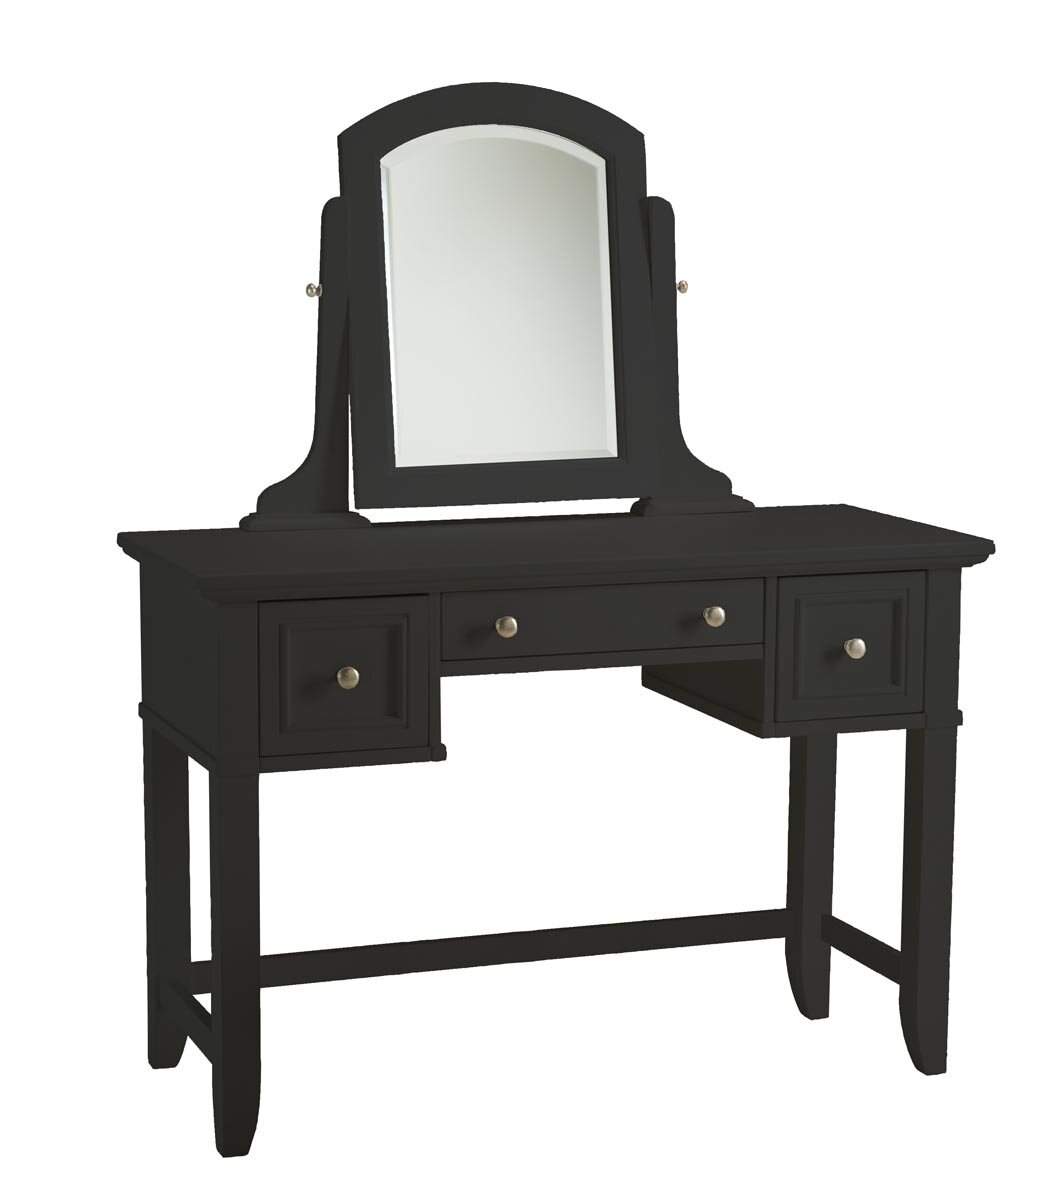 Home Styles 5531-70 Bedford Vanity Table, Black Finish